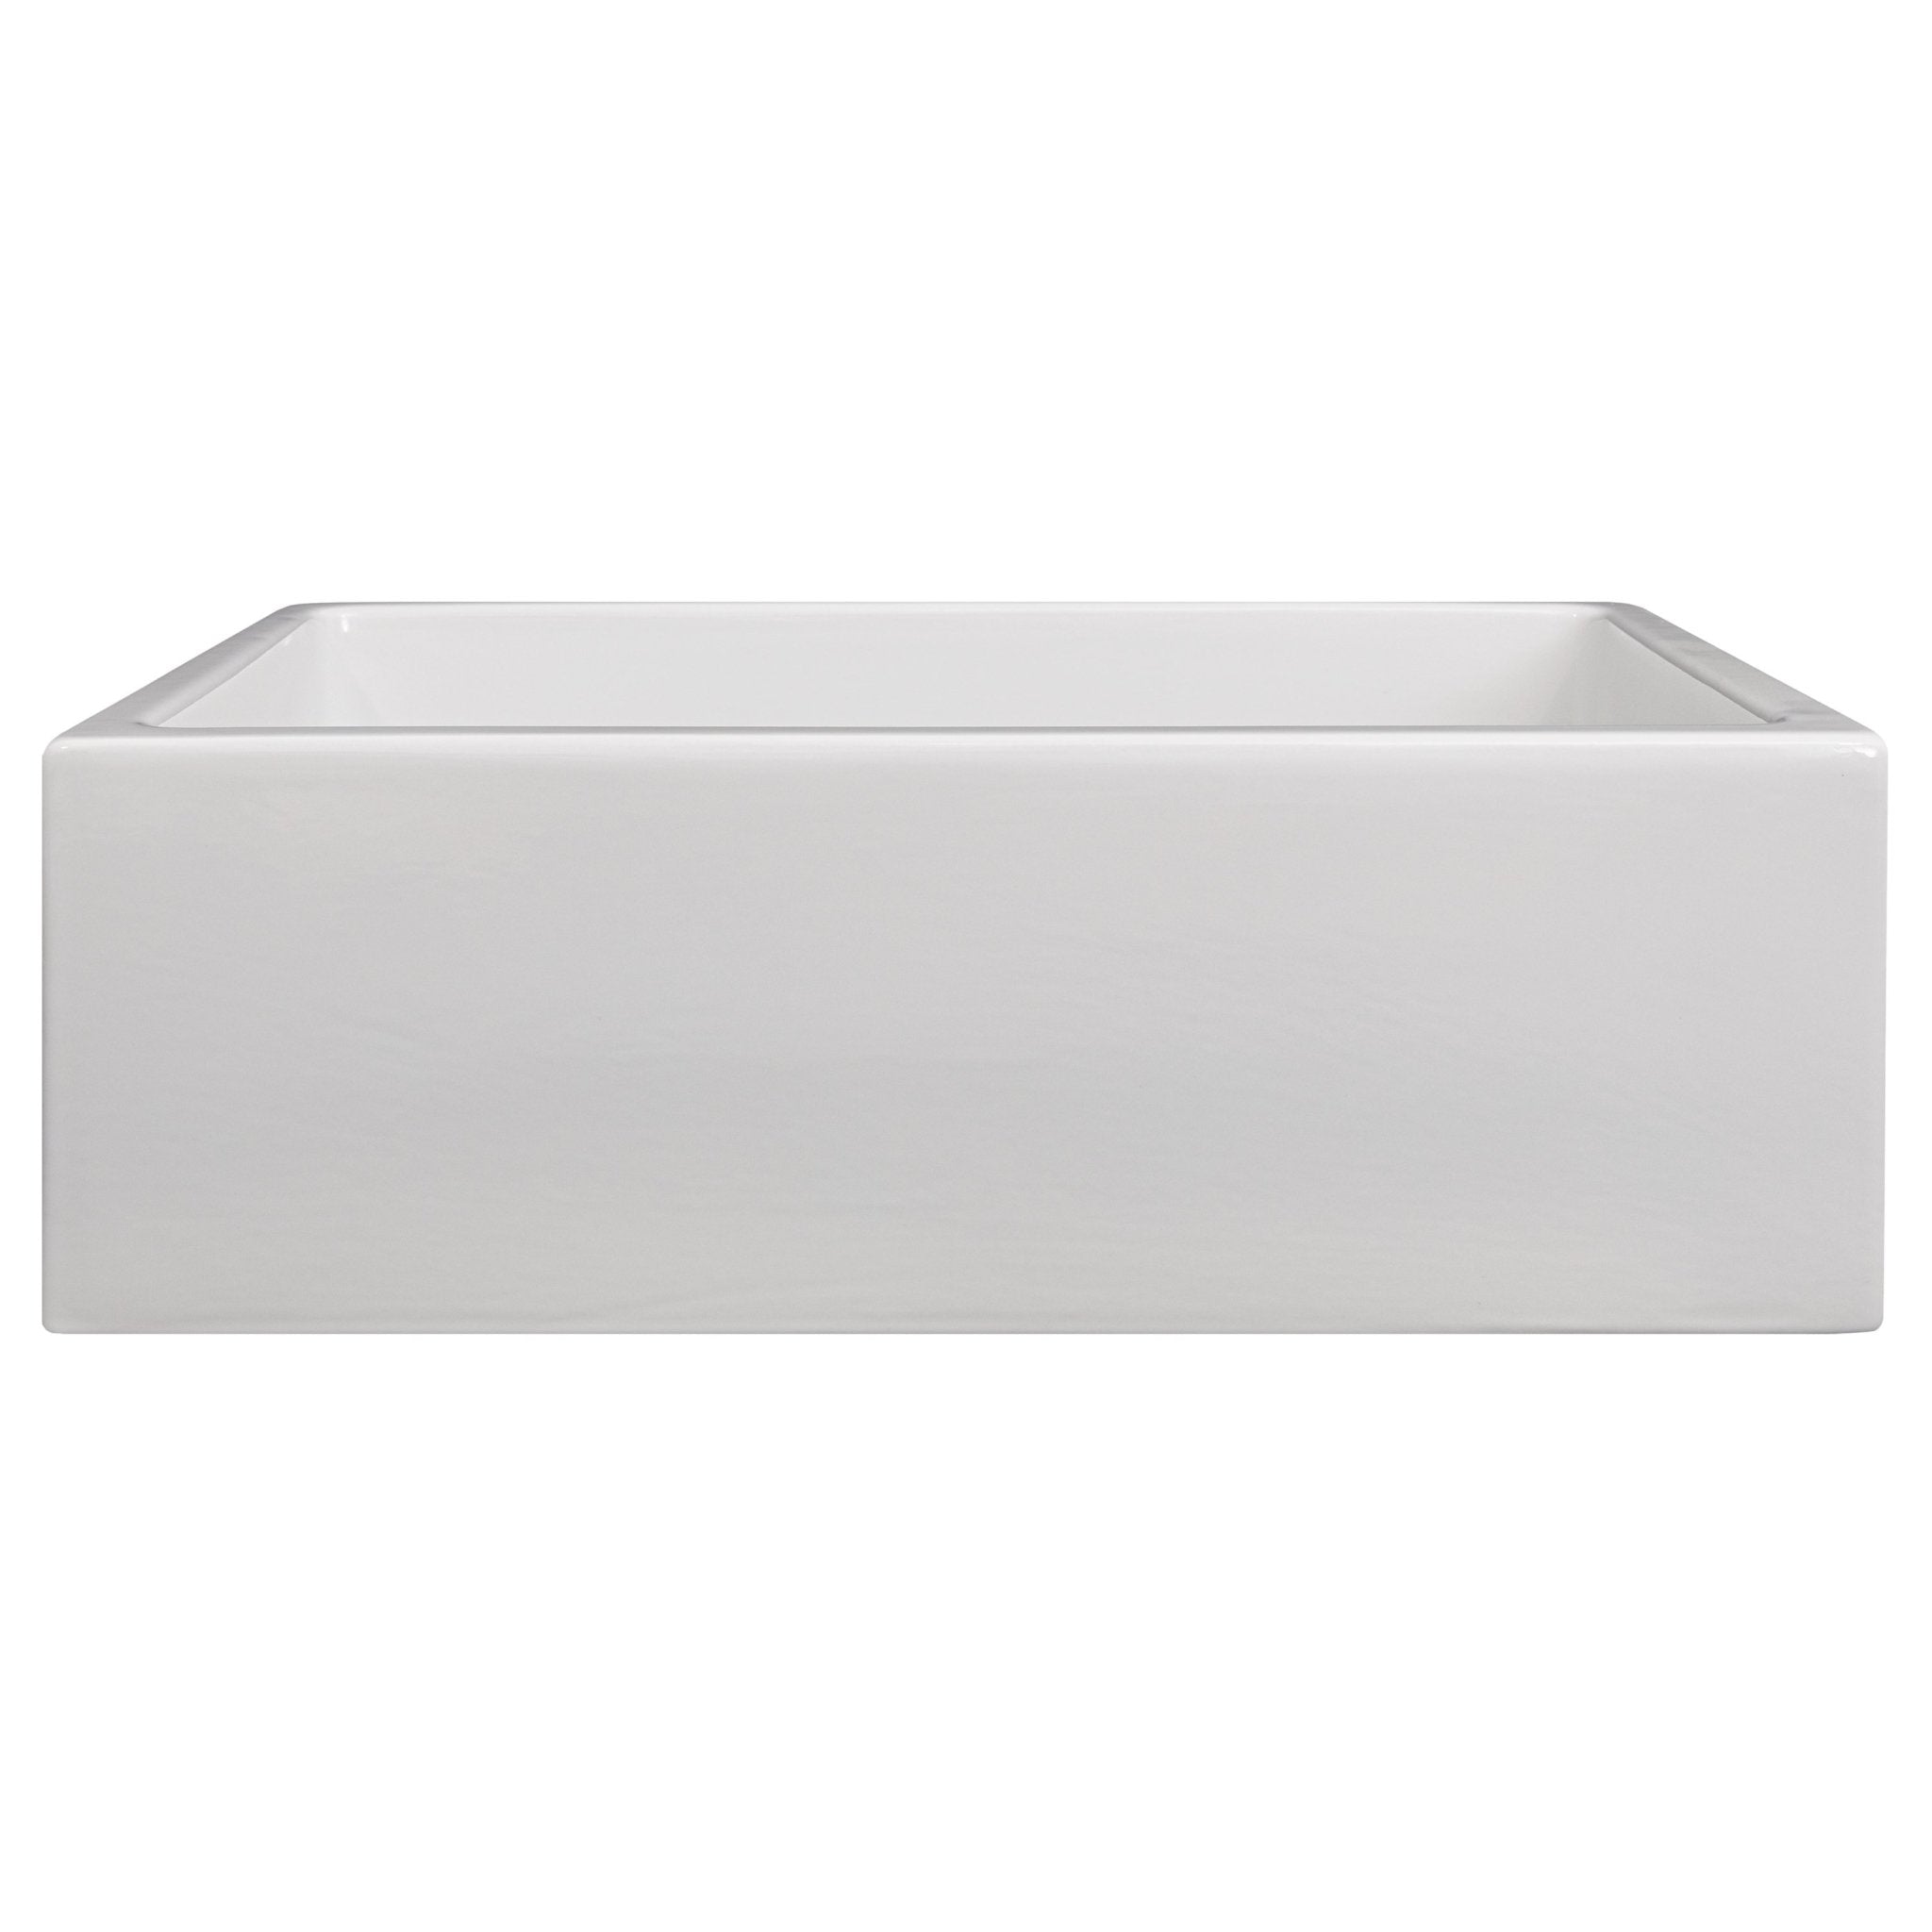 ZLINE 30 in. Turin Farmhouse Apron Front Reversible Single Bowl Fireclay Kitchen Sink with Bottom Grid in White Gloss, FRC5117-WH-30